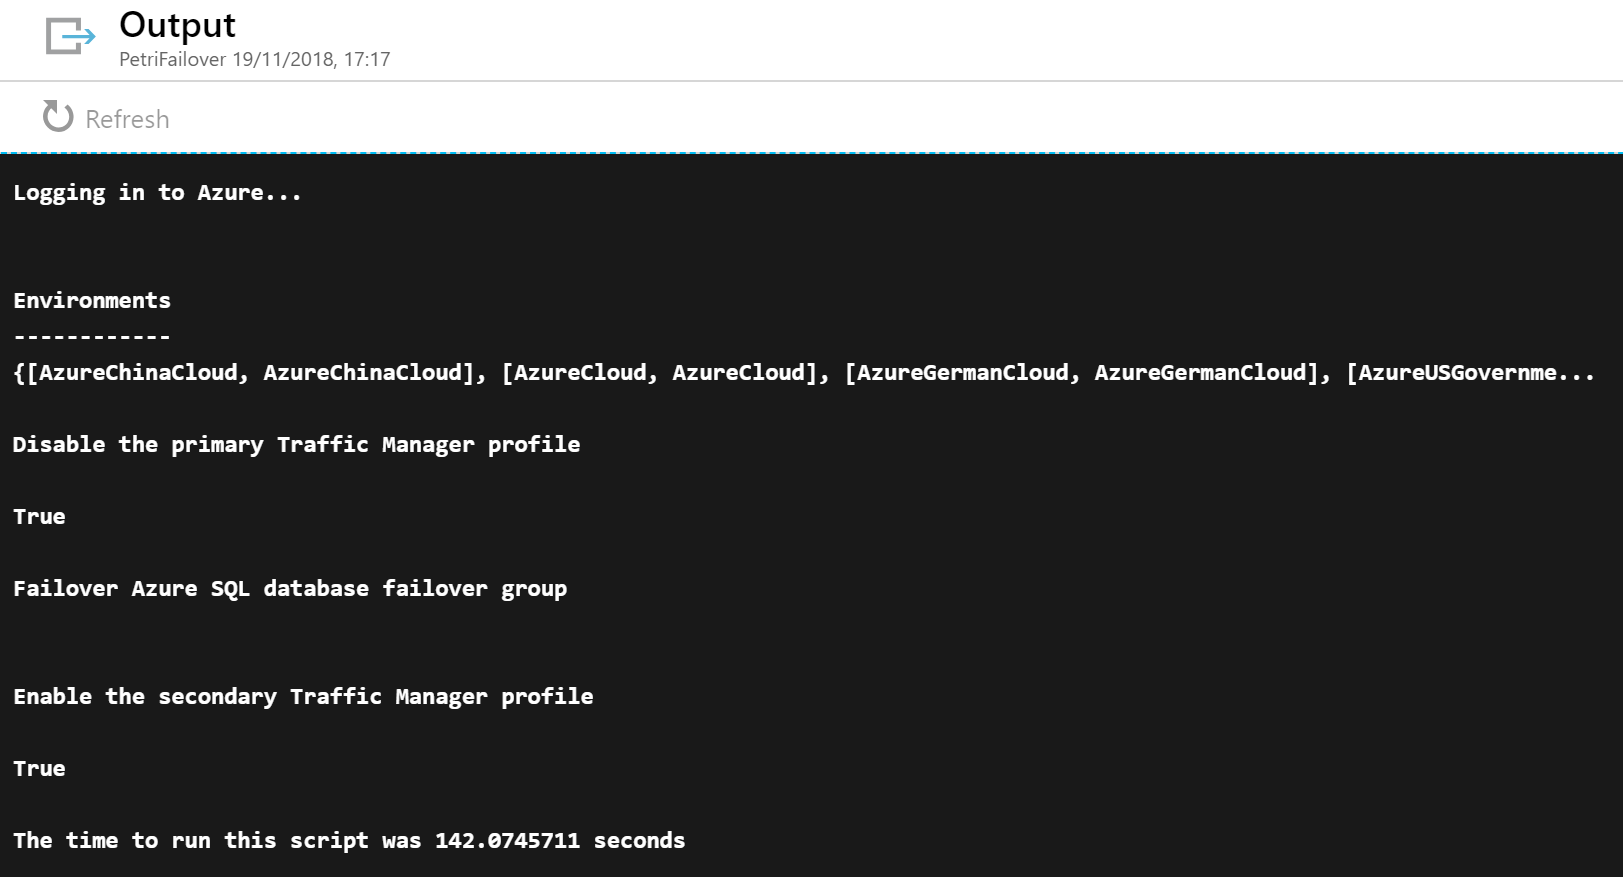 The output of an Azure Automation runbook failing over the web app [Image Credit: Aidan Finn]